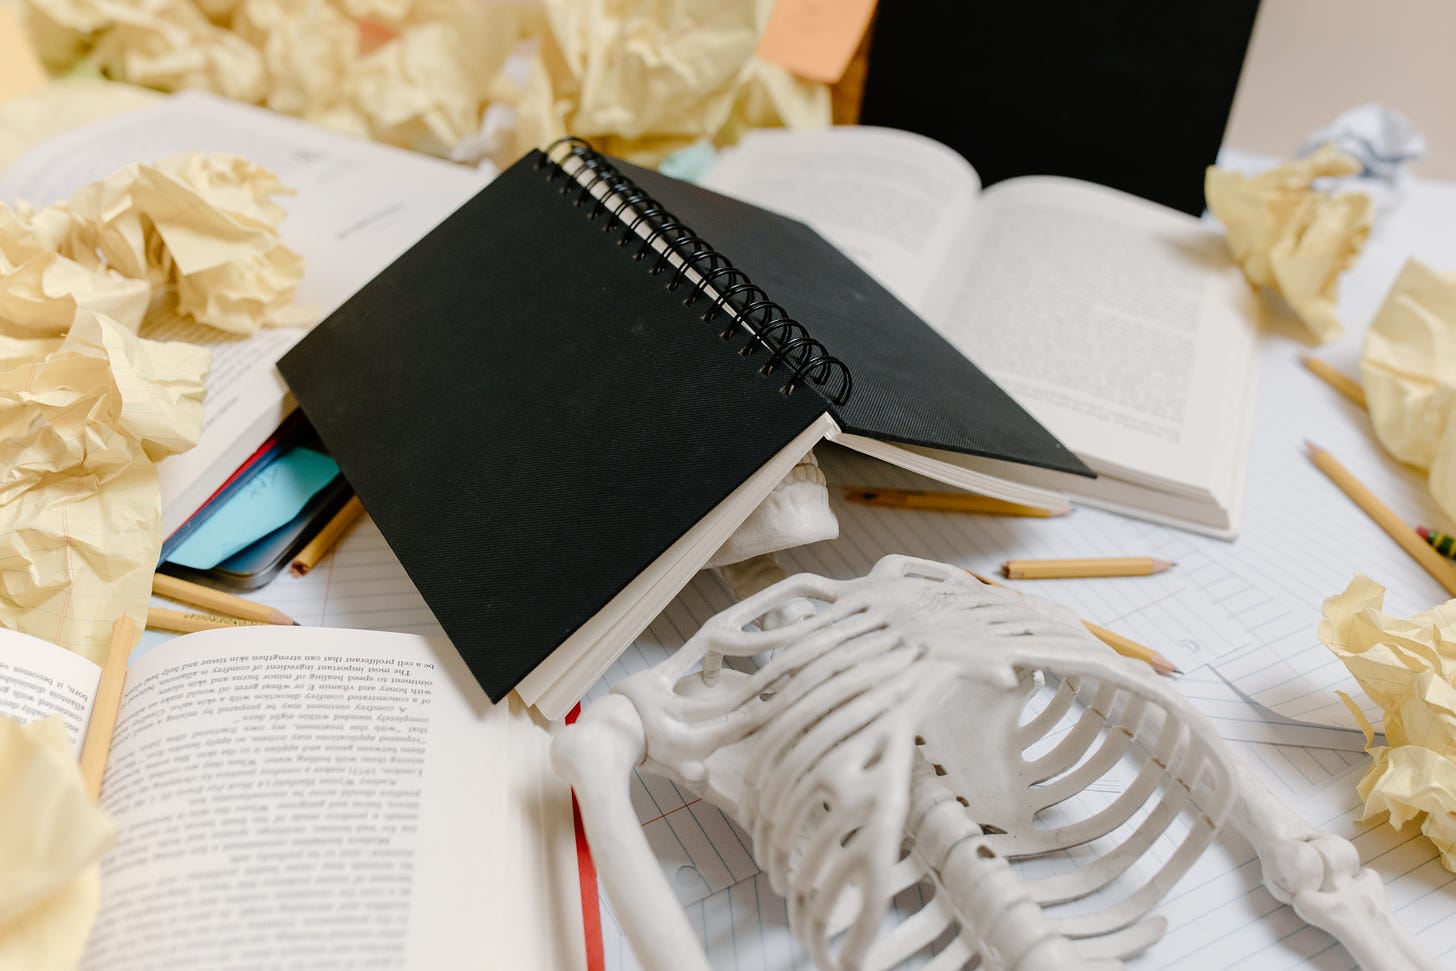 a plastic skeleton is laying on a desk under a notebook surrounded by wadded up yellow papers and writing utensils 